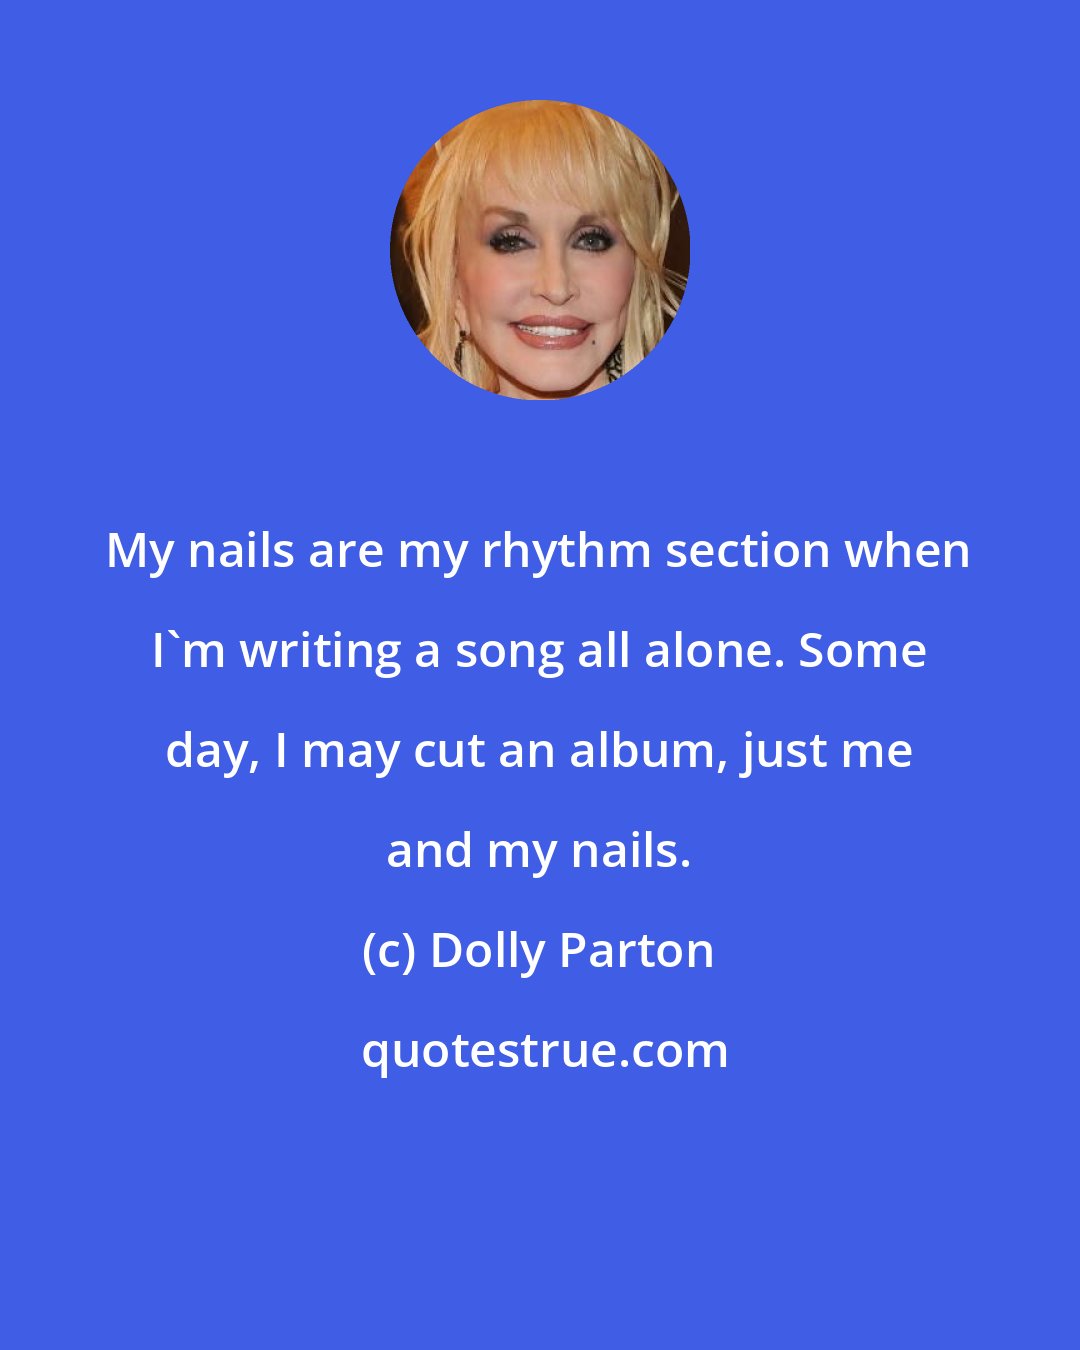 Dolly Parton: My nails are my rhythm section when I'm writing a song all alone. Some day, I may cut an album, just me and my nails.